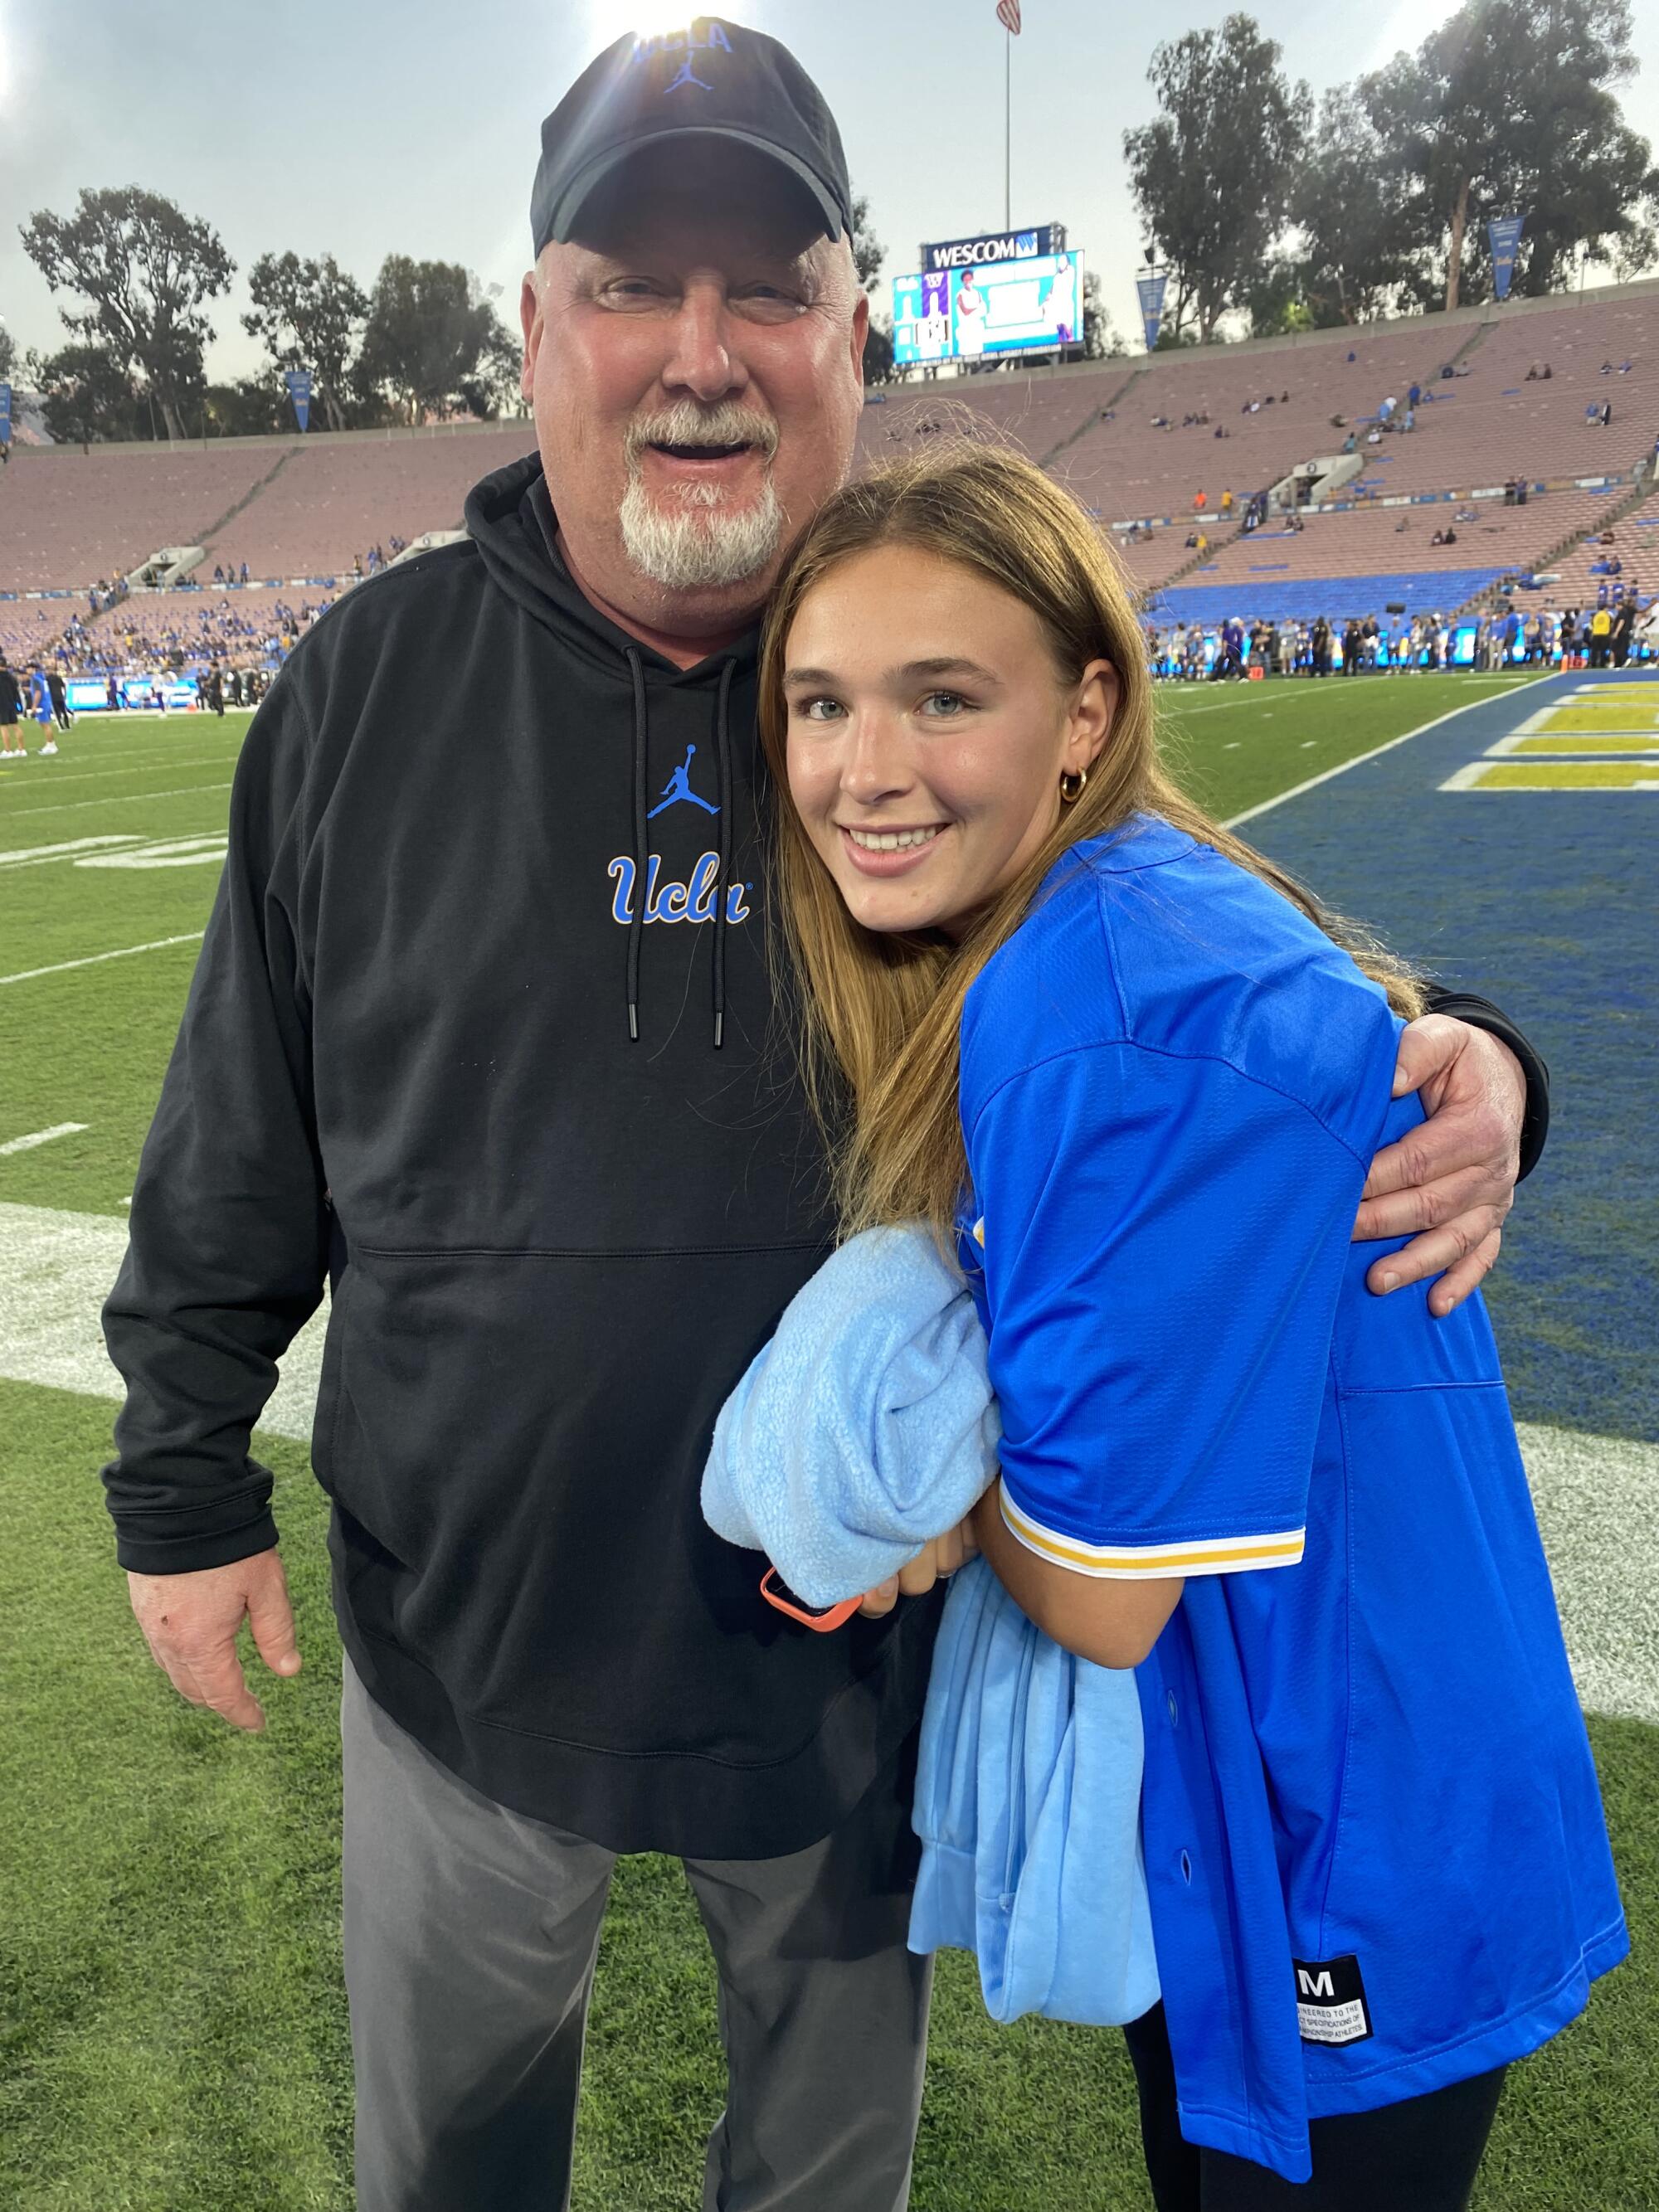 MacKenzie McGovern hugs her father, Bill, during a UCLA game at the Rose Bowl.